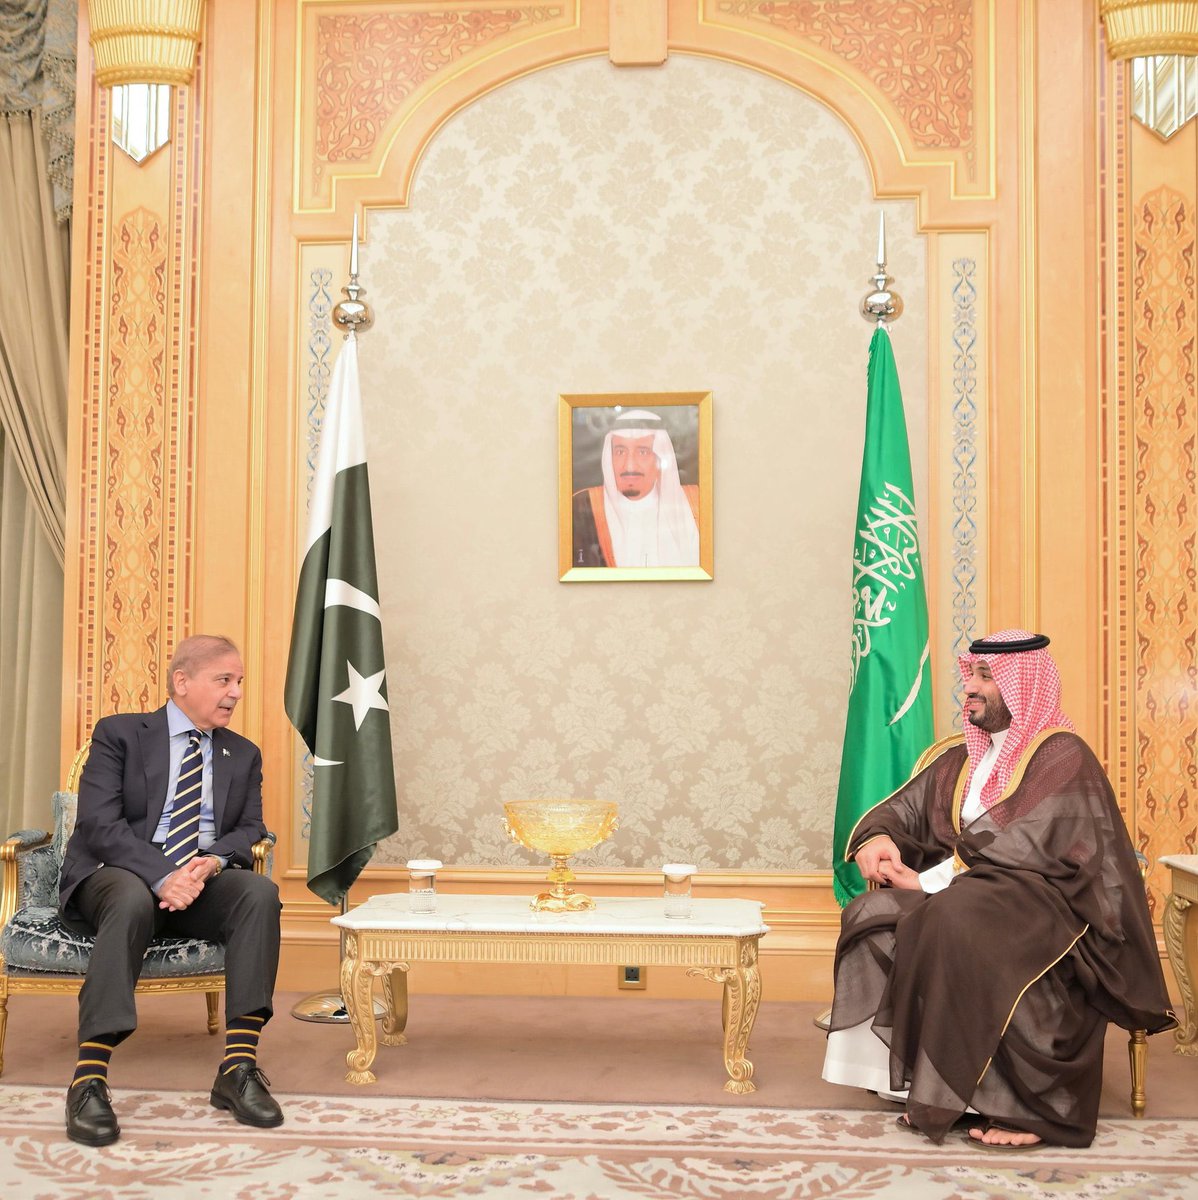 An extremely important meeting between the Prime Minister of Islamic Republic of Pakistan, Shehbaz Sharif and Crown Prince Mohammed Bin Salman is taking place right now. The body language of both leaders shows trust and appreciation for each other. Good news coming soon! 🇵🇰